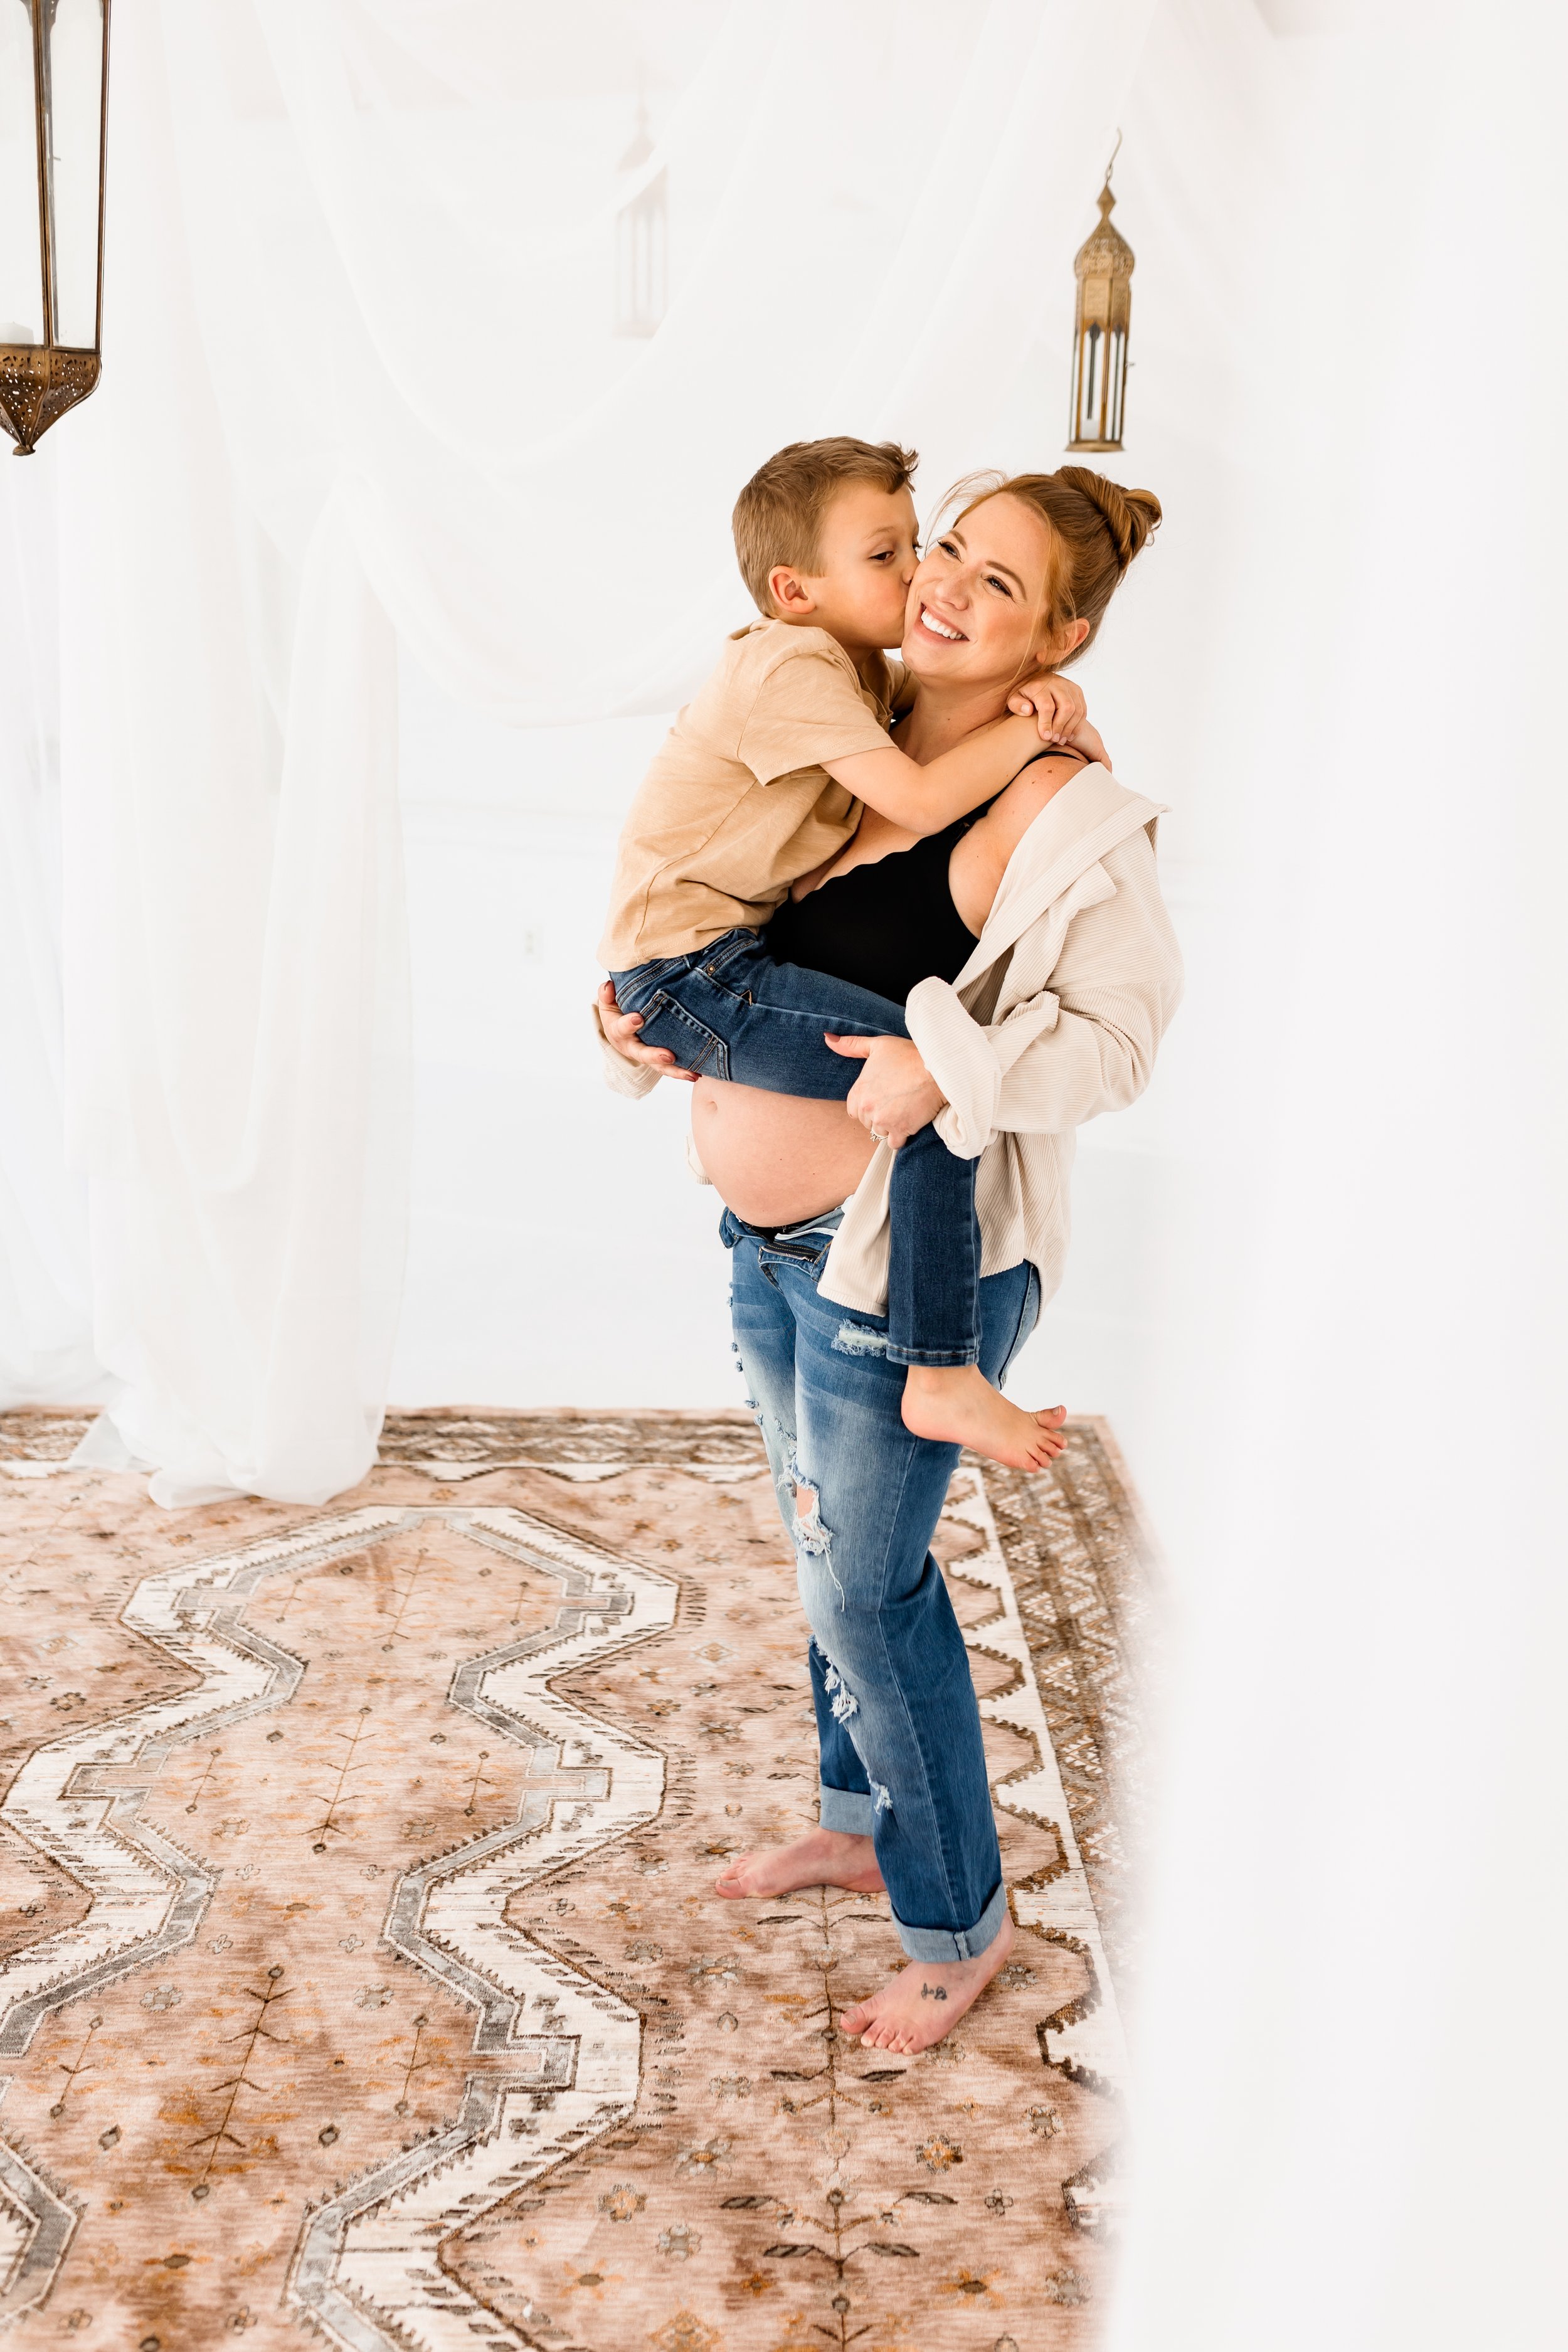 Kelly Anne Photography NH Lifestyle Photographer Studio Maternity Family Session Final Gallery-21.jpg